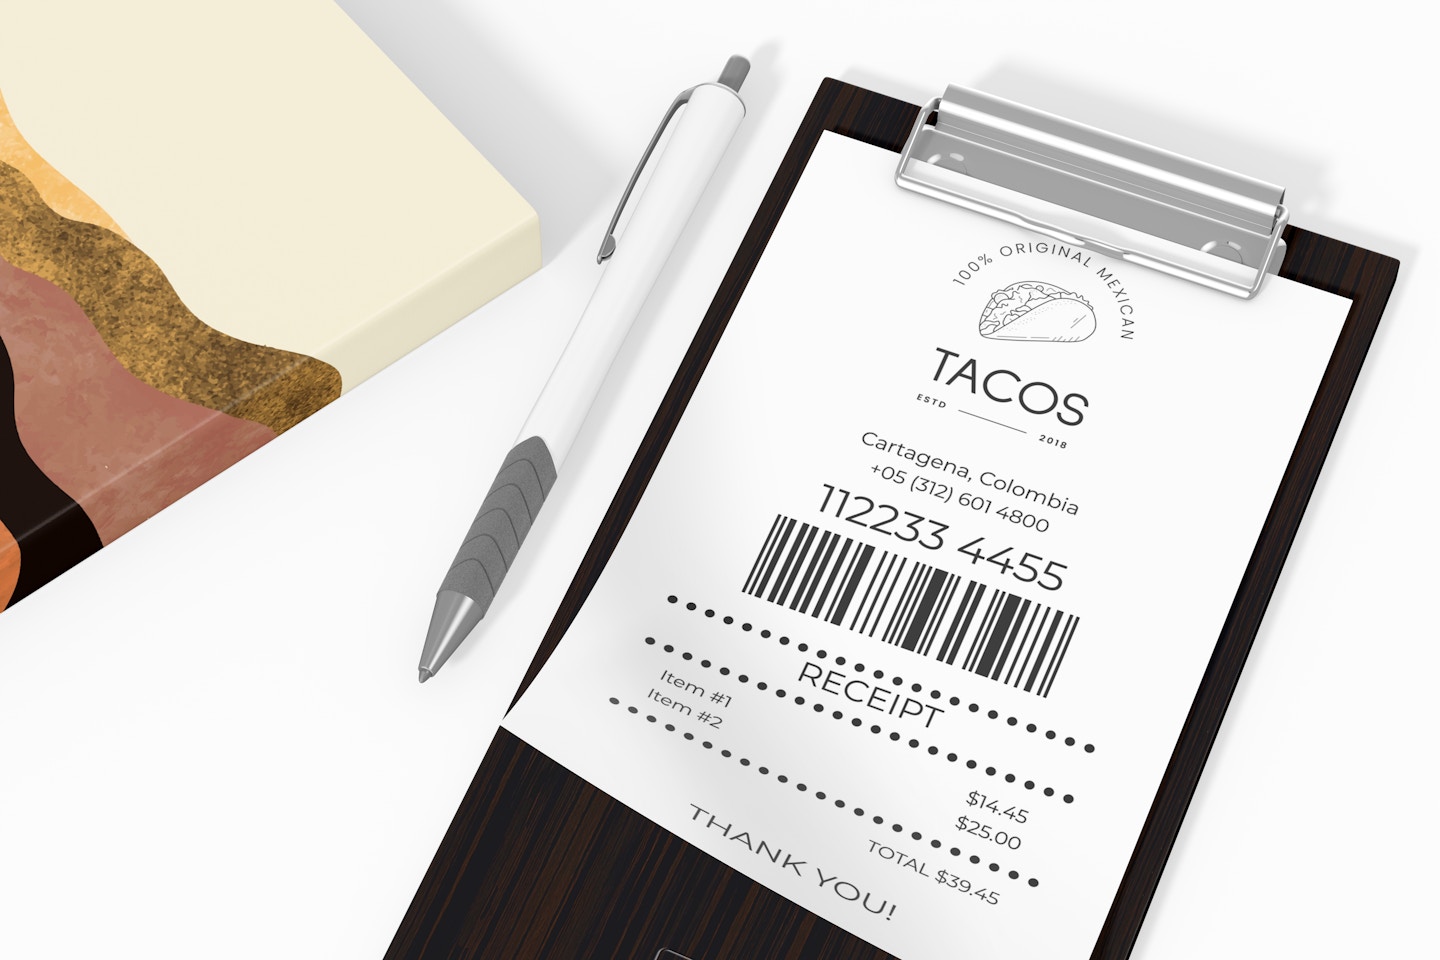 Wooden Check Presenter Mockup, with Pen